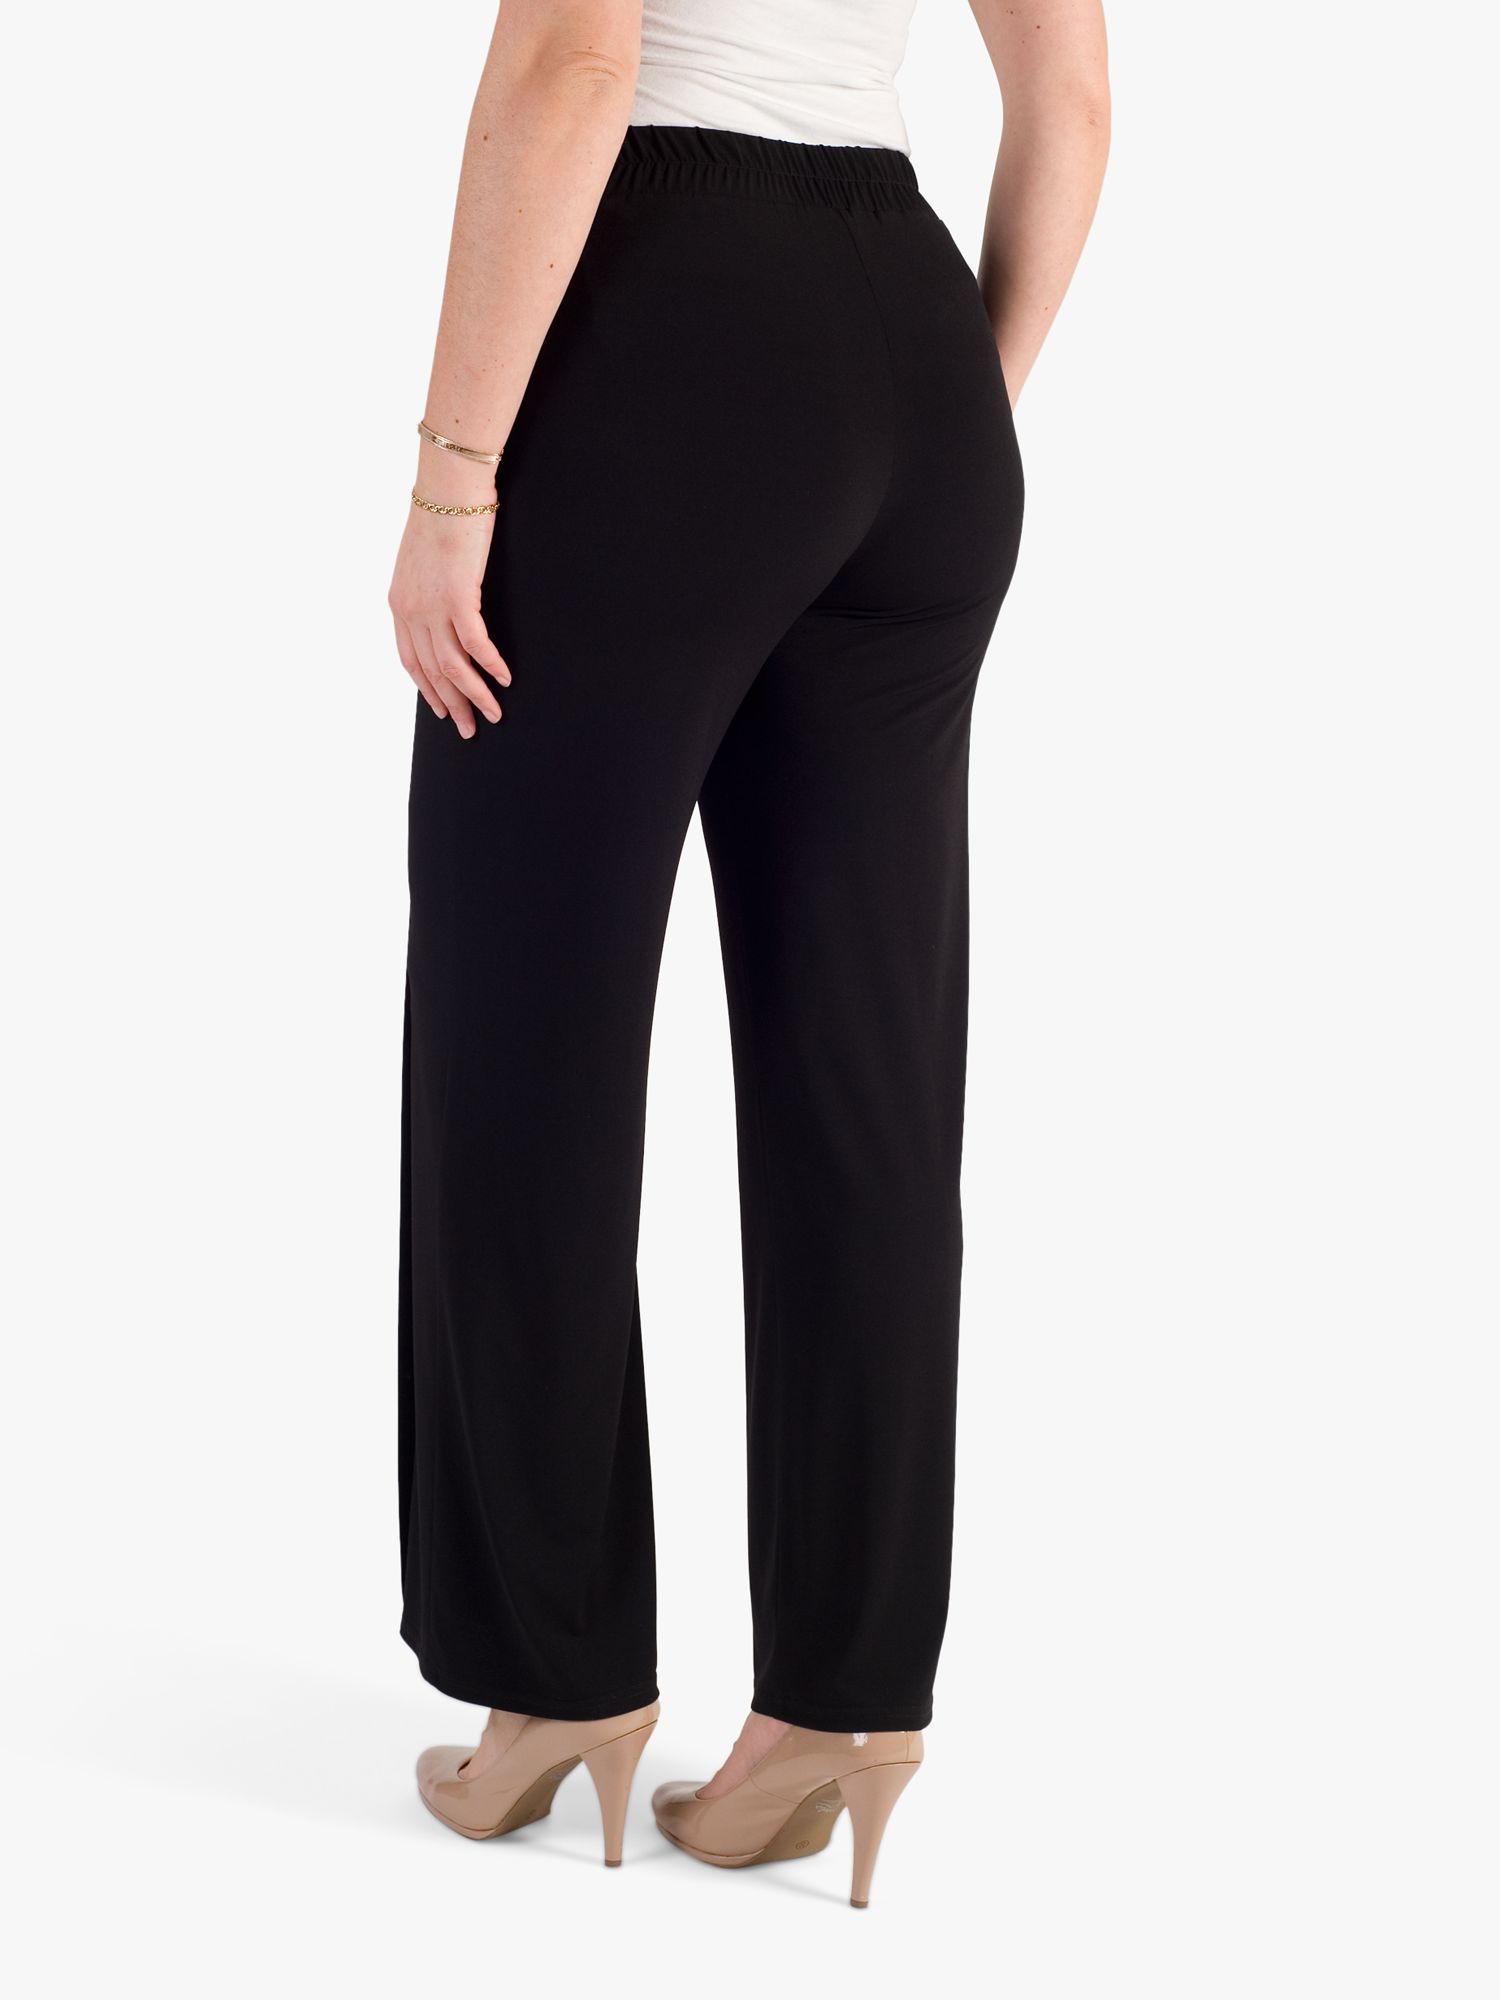 chesca Button Jersey Trousers, Black, 12-14